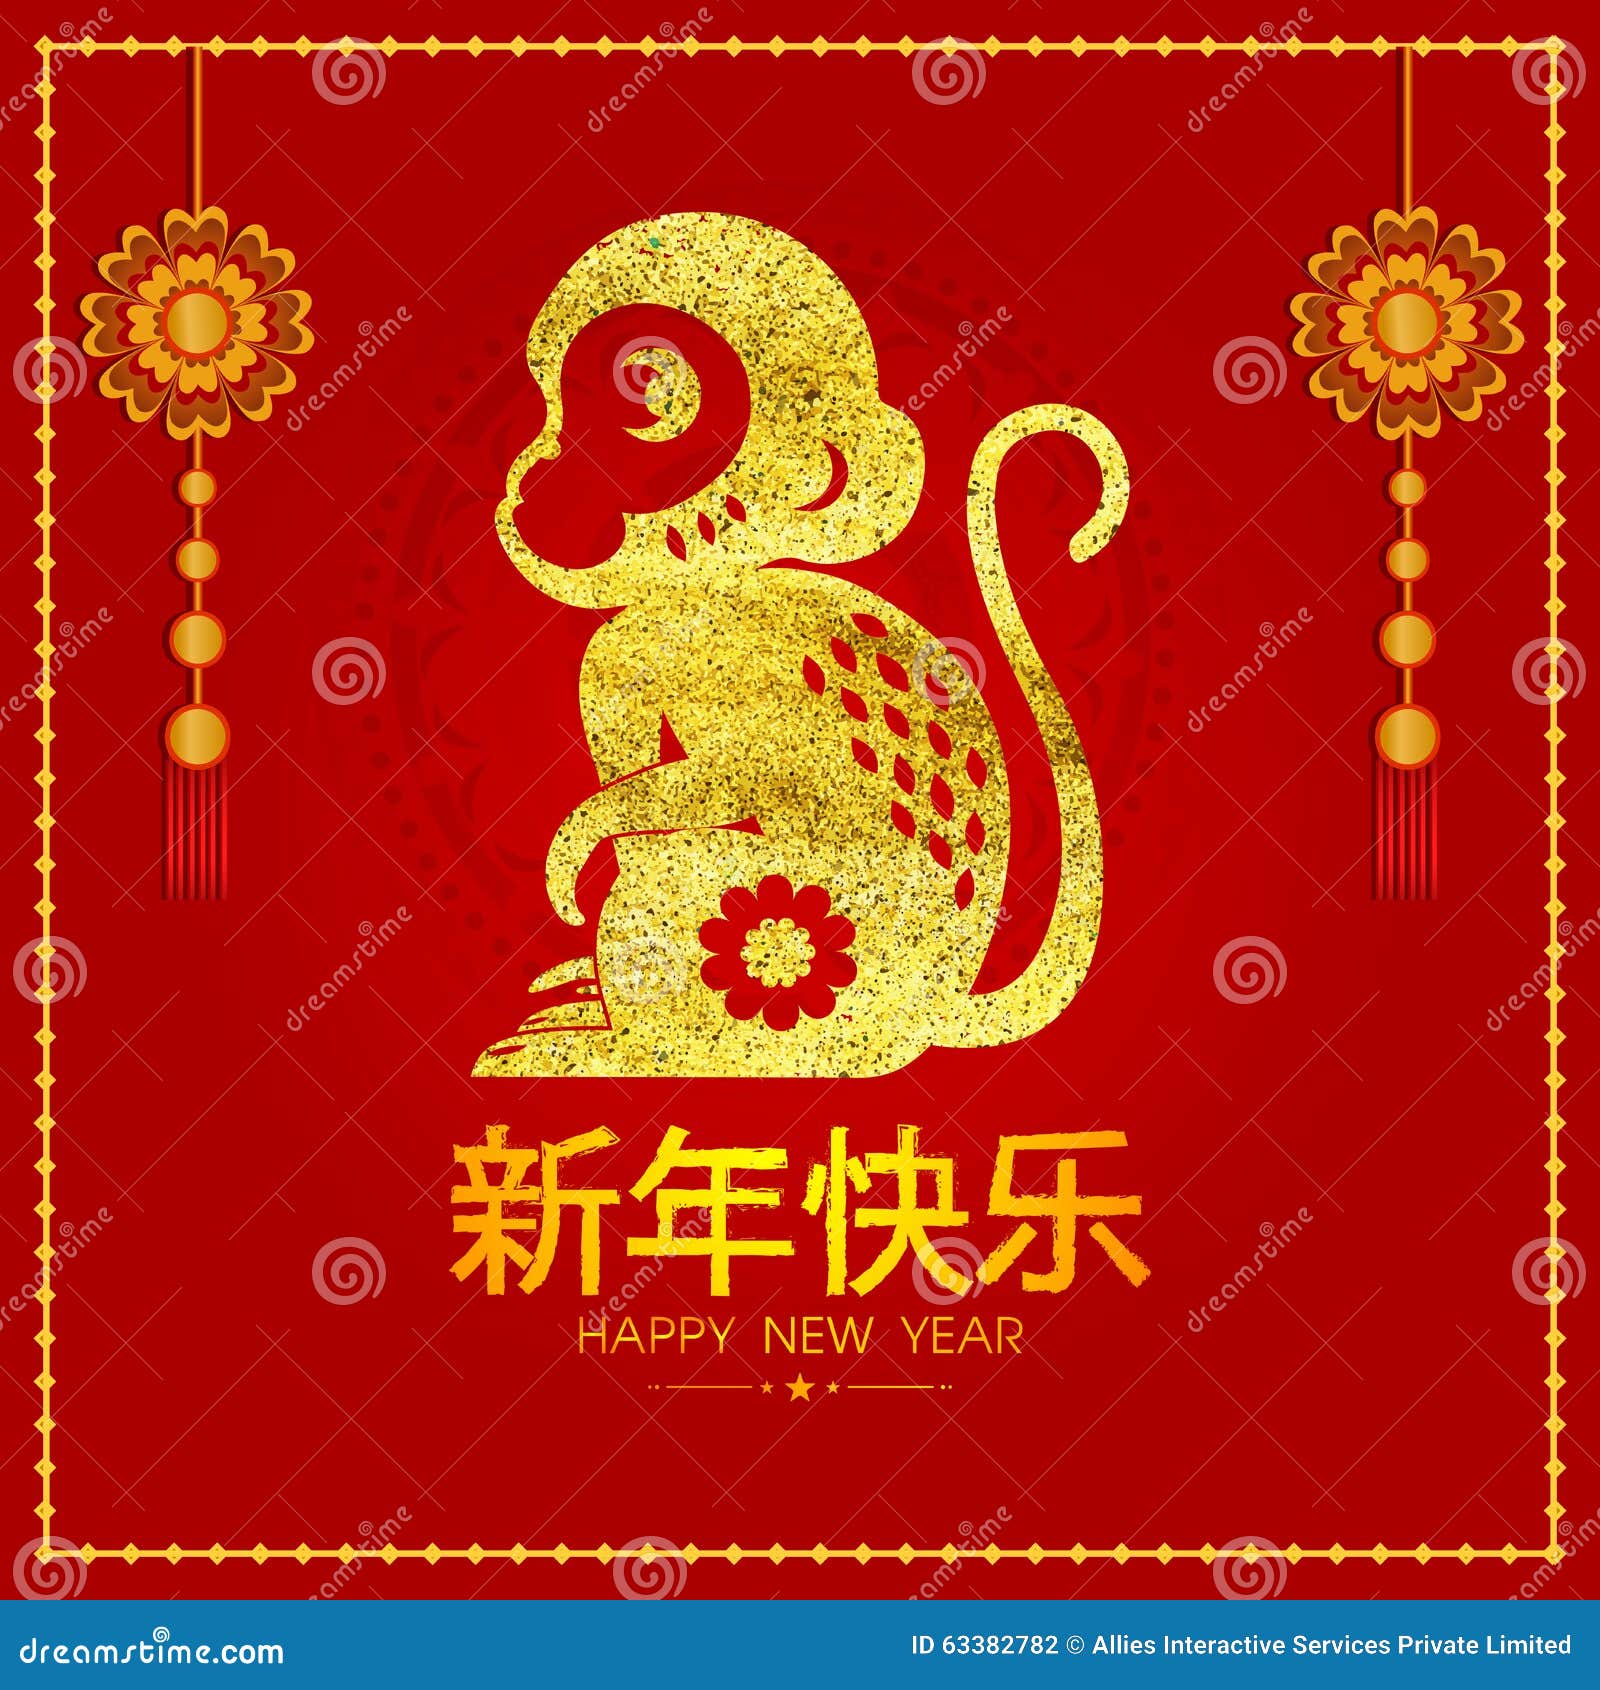 Premium Vector  Vector set of chinese new year money clipart. red envelope,  gold ingot, ancient coin vector cartoon